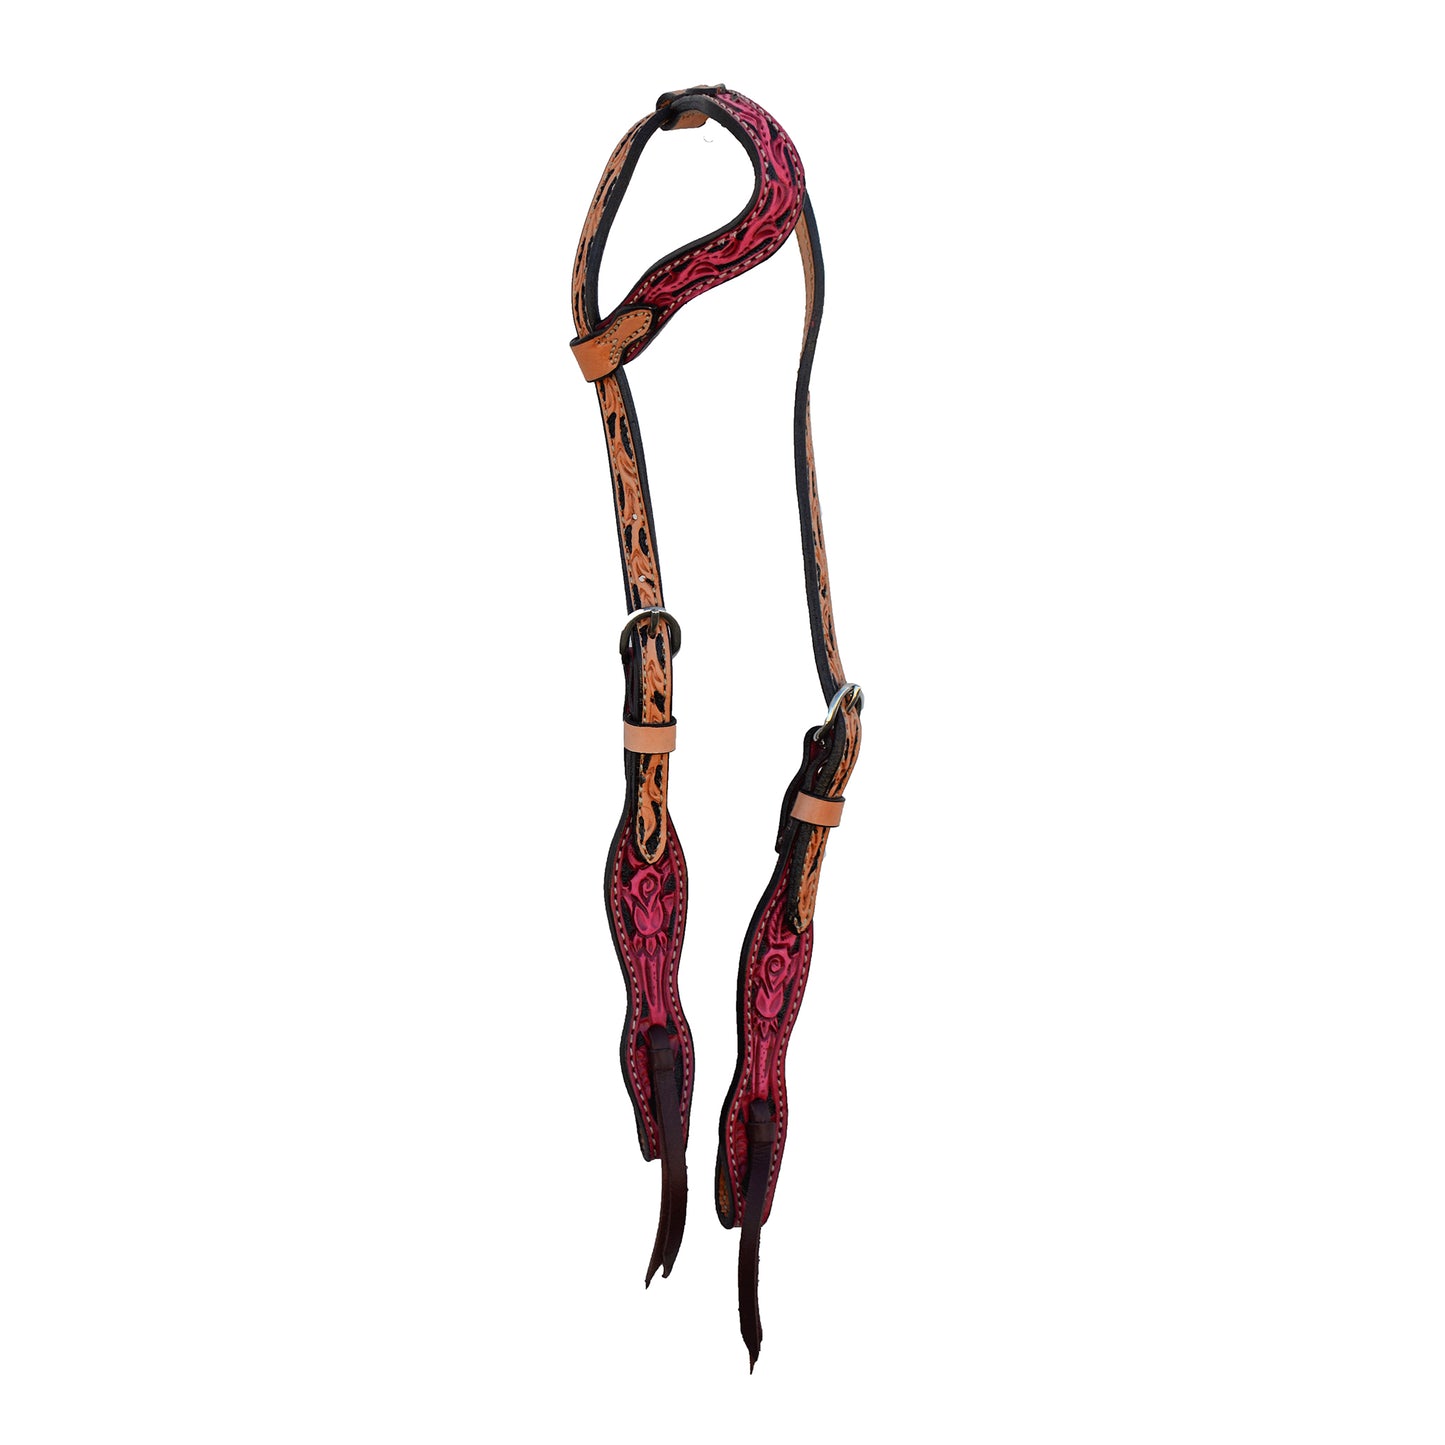 5/8" wave one ear headstall dirty pink and golden leather rose tooling with black background paint.